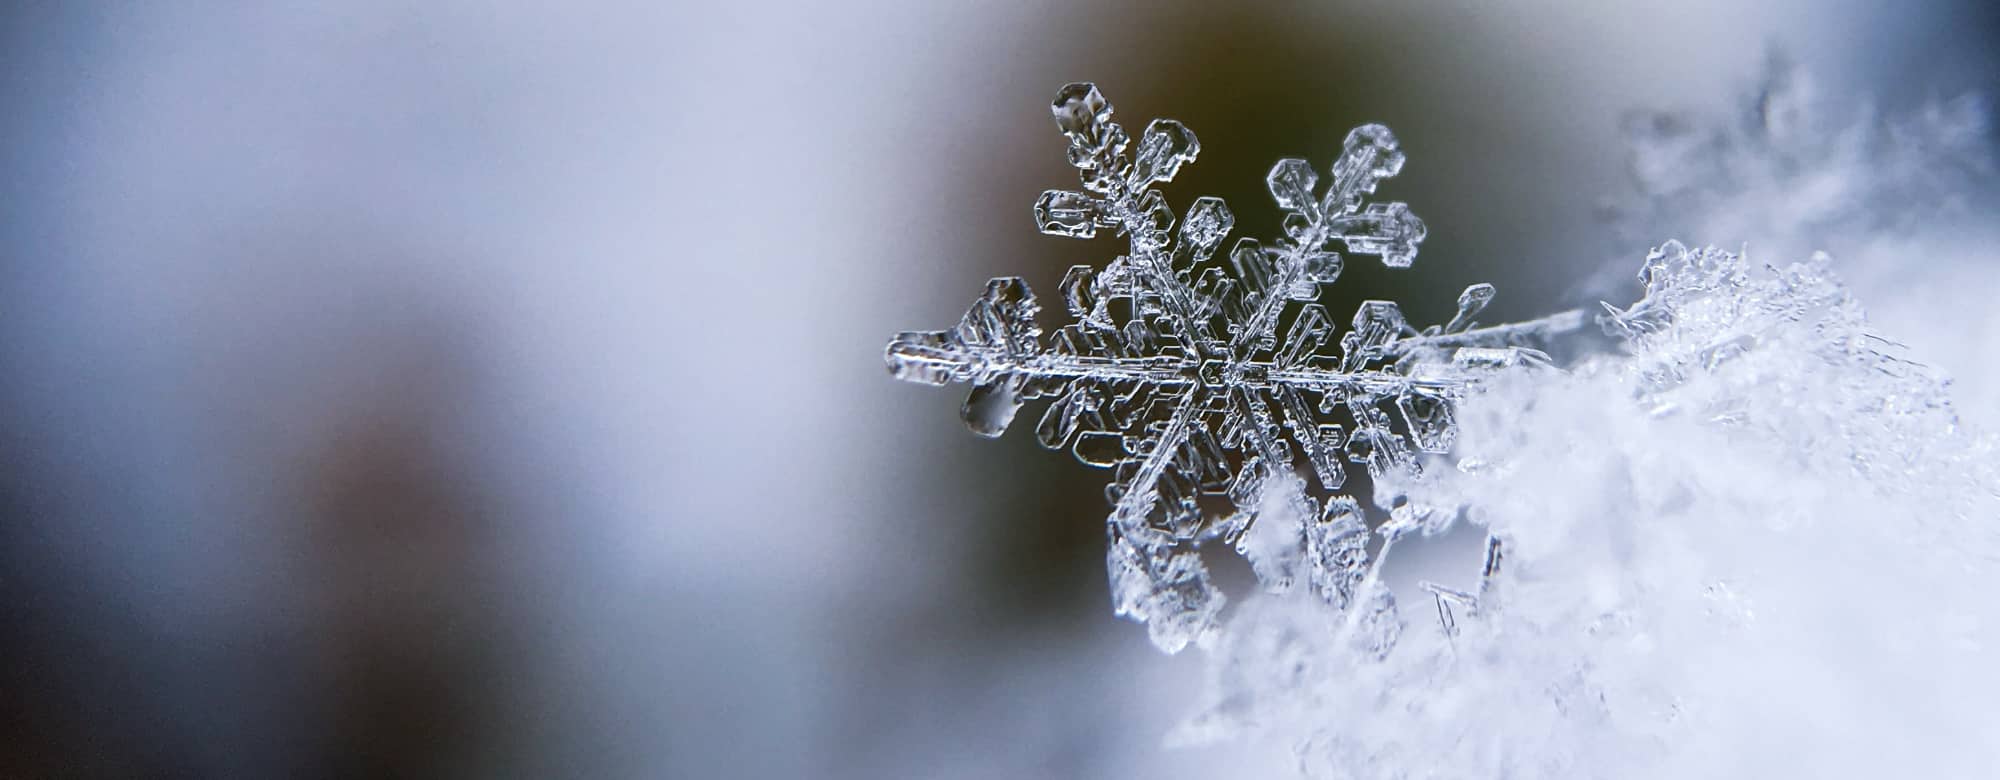 Photography of a snowflake